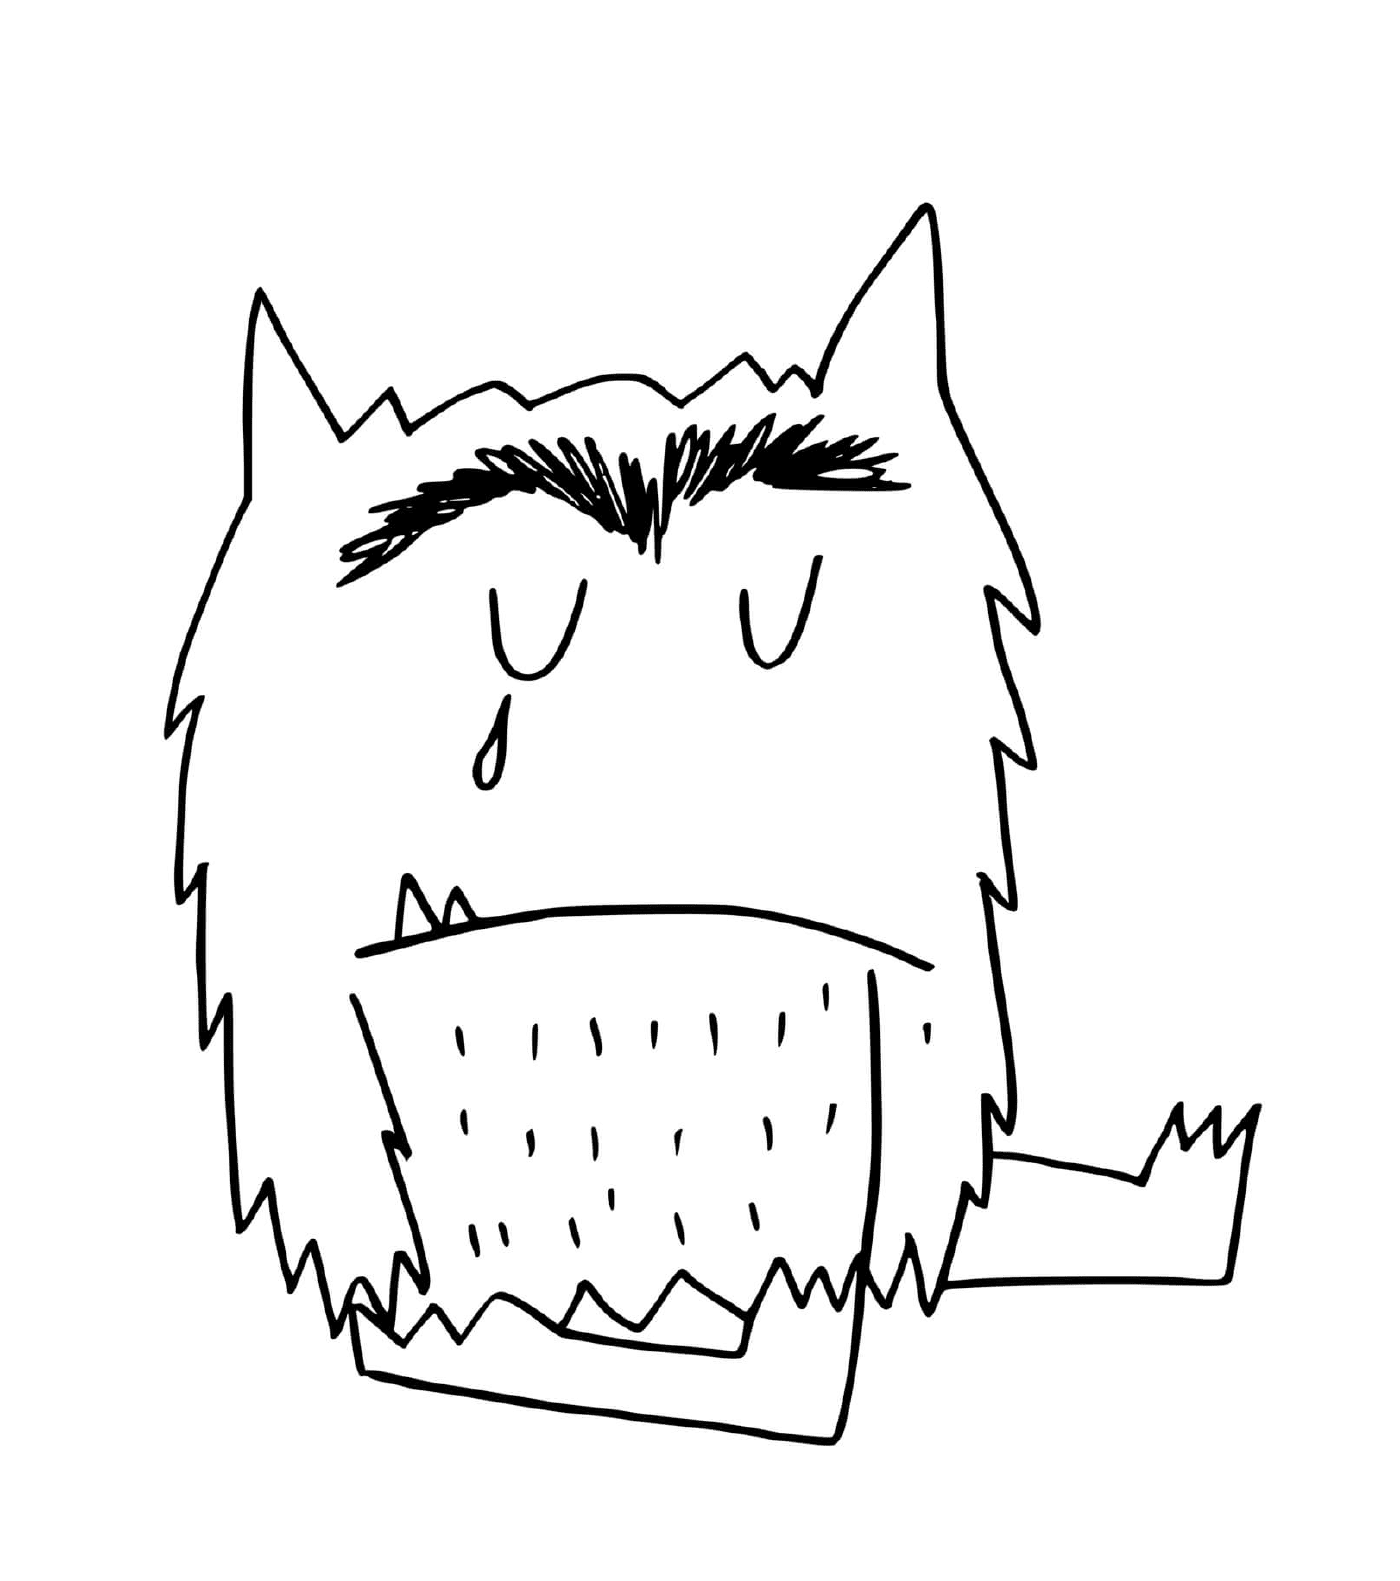  Weeping monster with beard 